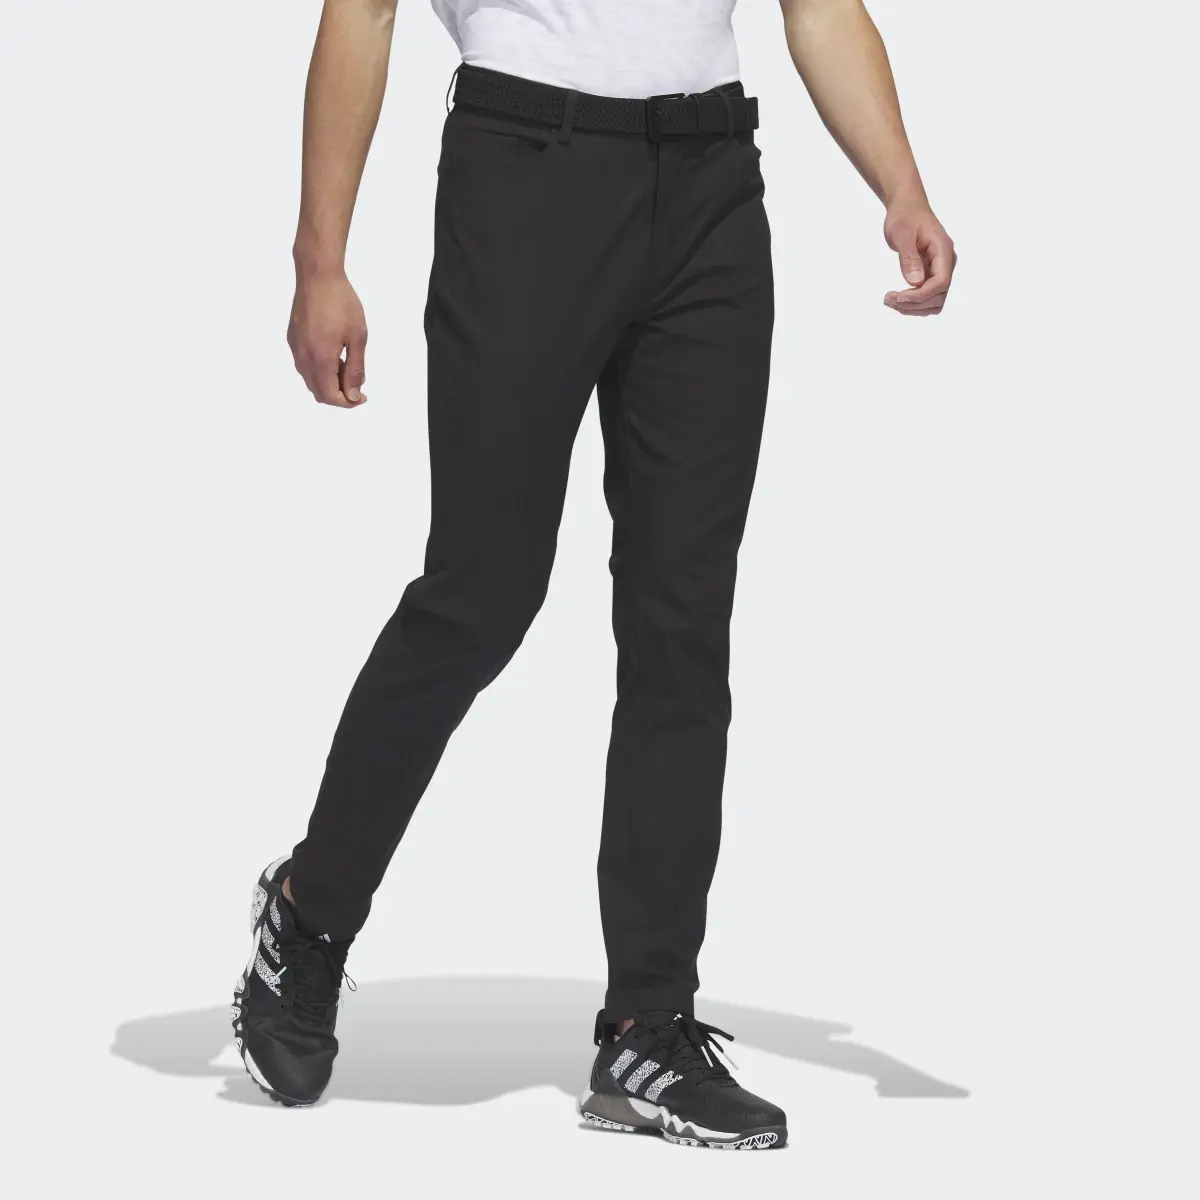 Adidas Go-To 5-Pocket Golf Trousers. 3